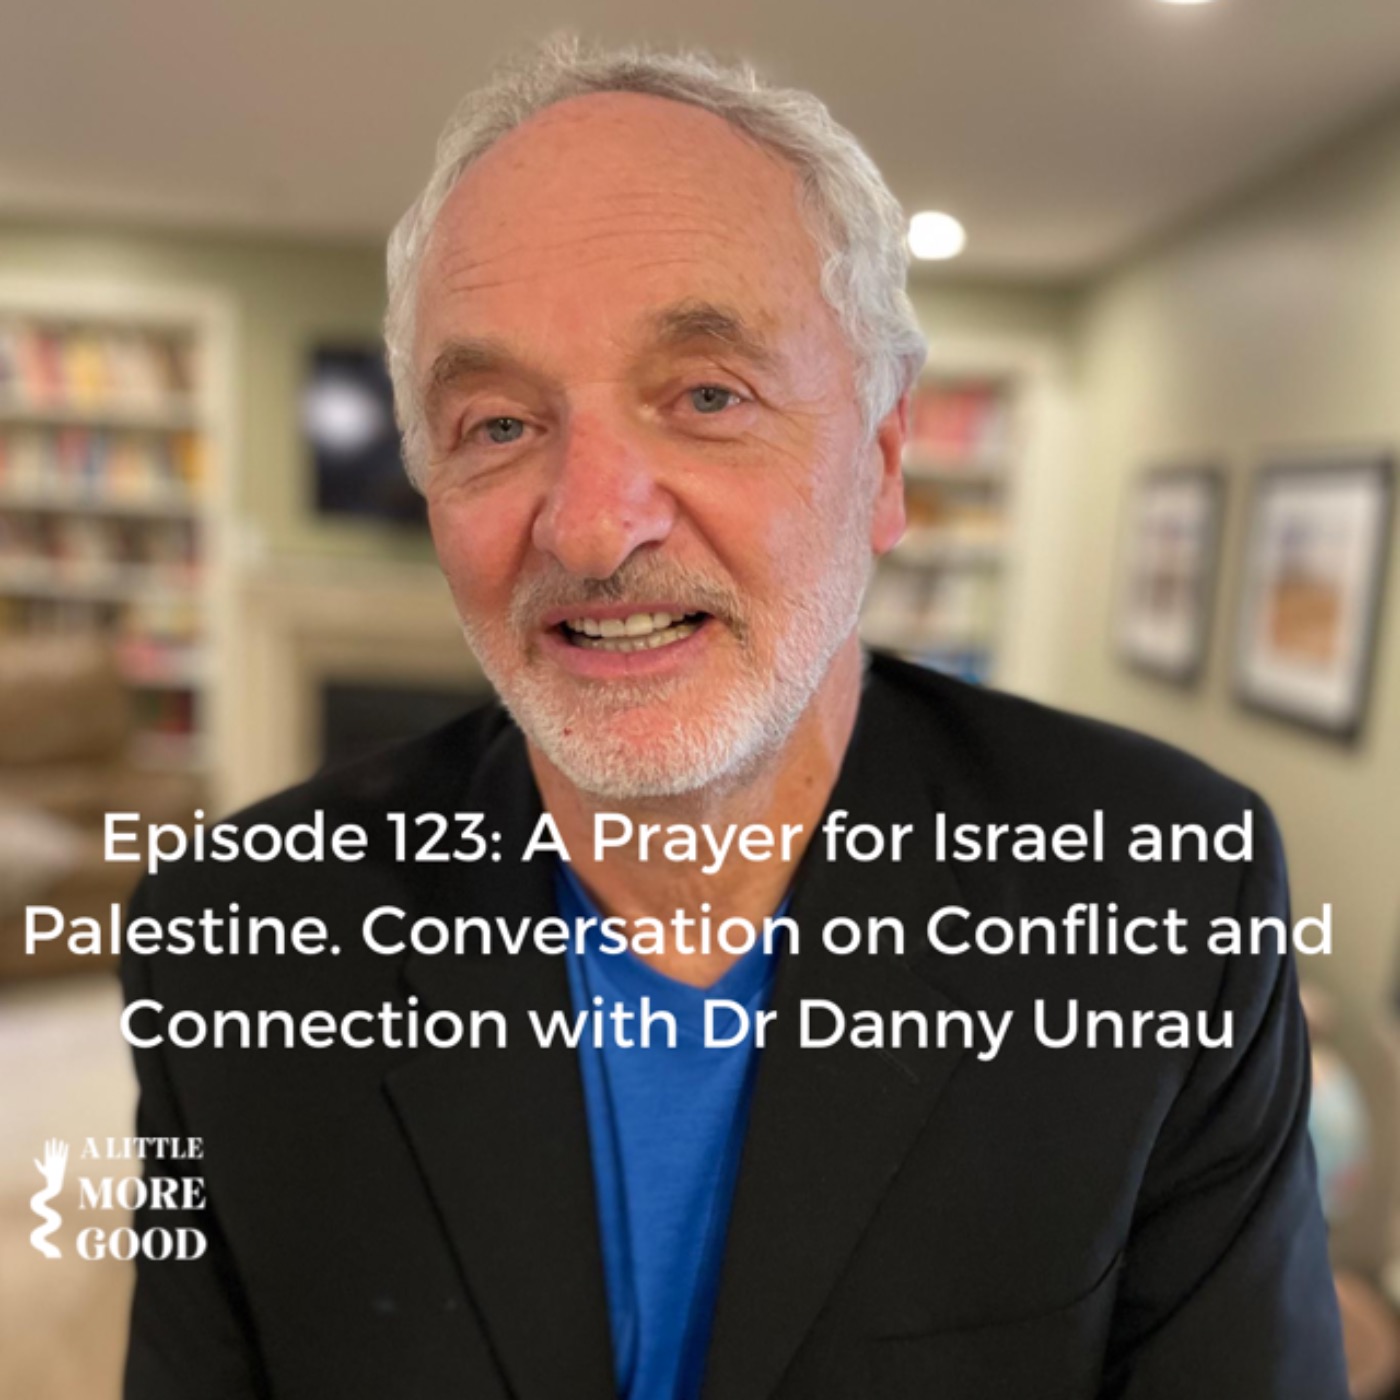 A Prayer for Israel and Palestine. A Conversation on conflict and connection with Dr Danny Unrau